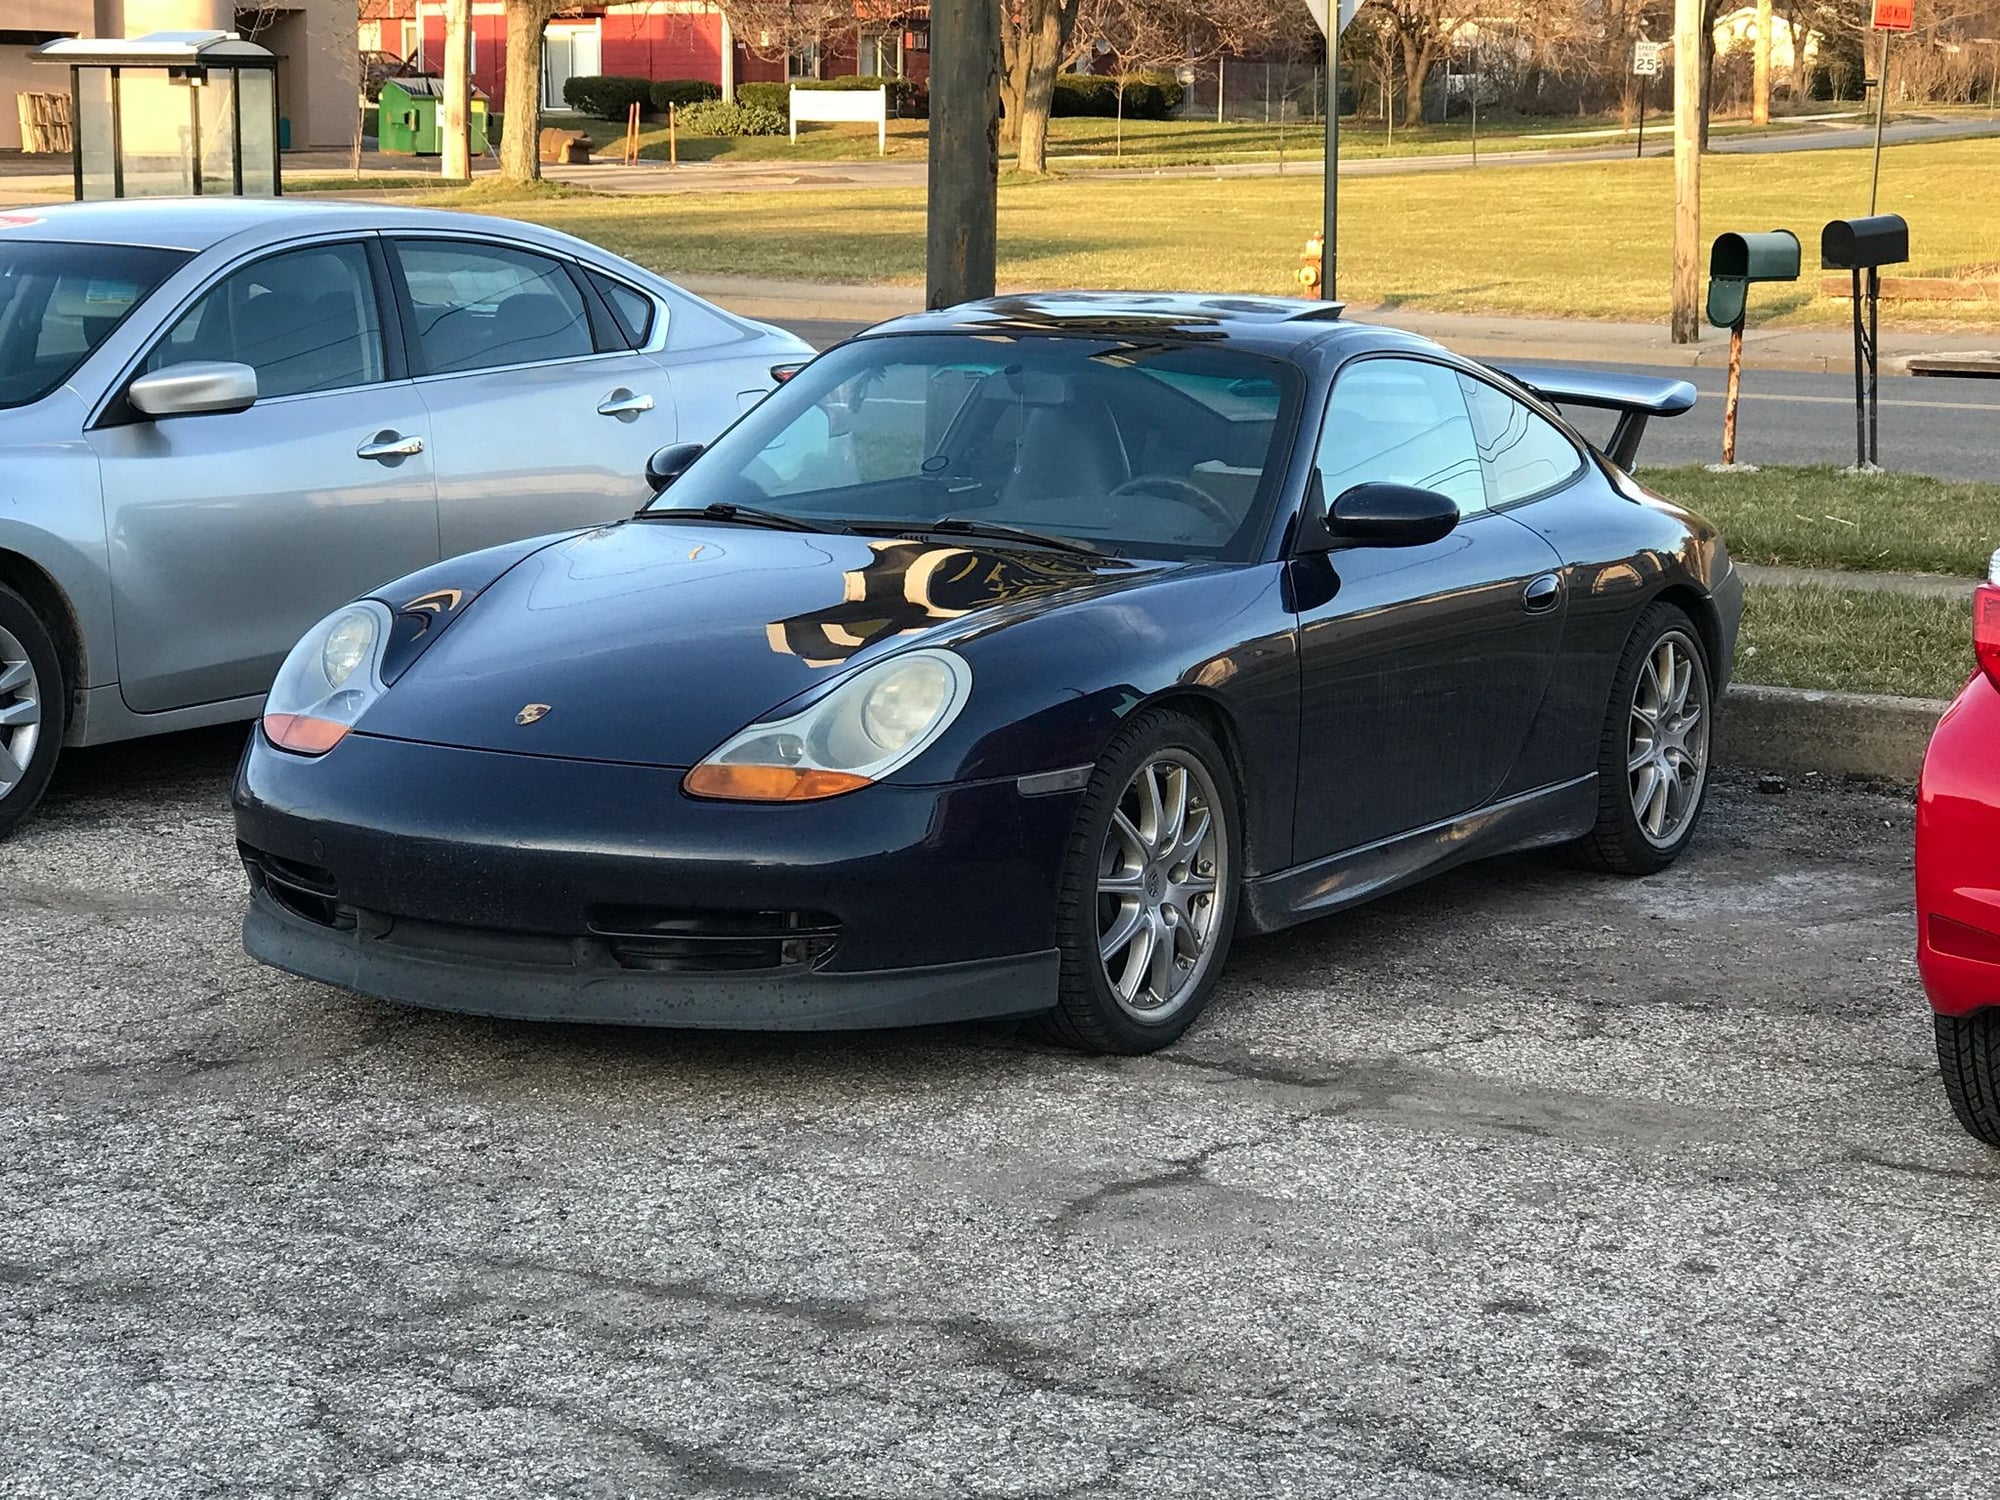 1999 Porsche 911 - 996 c2 - Used - VIN WP0AA2990XS620876 - 6 cyl - 2WD - Manual - Coupe - Blue - North Canton, OH 44720, United States